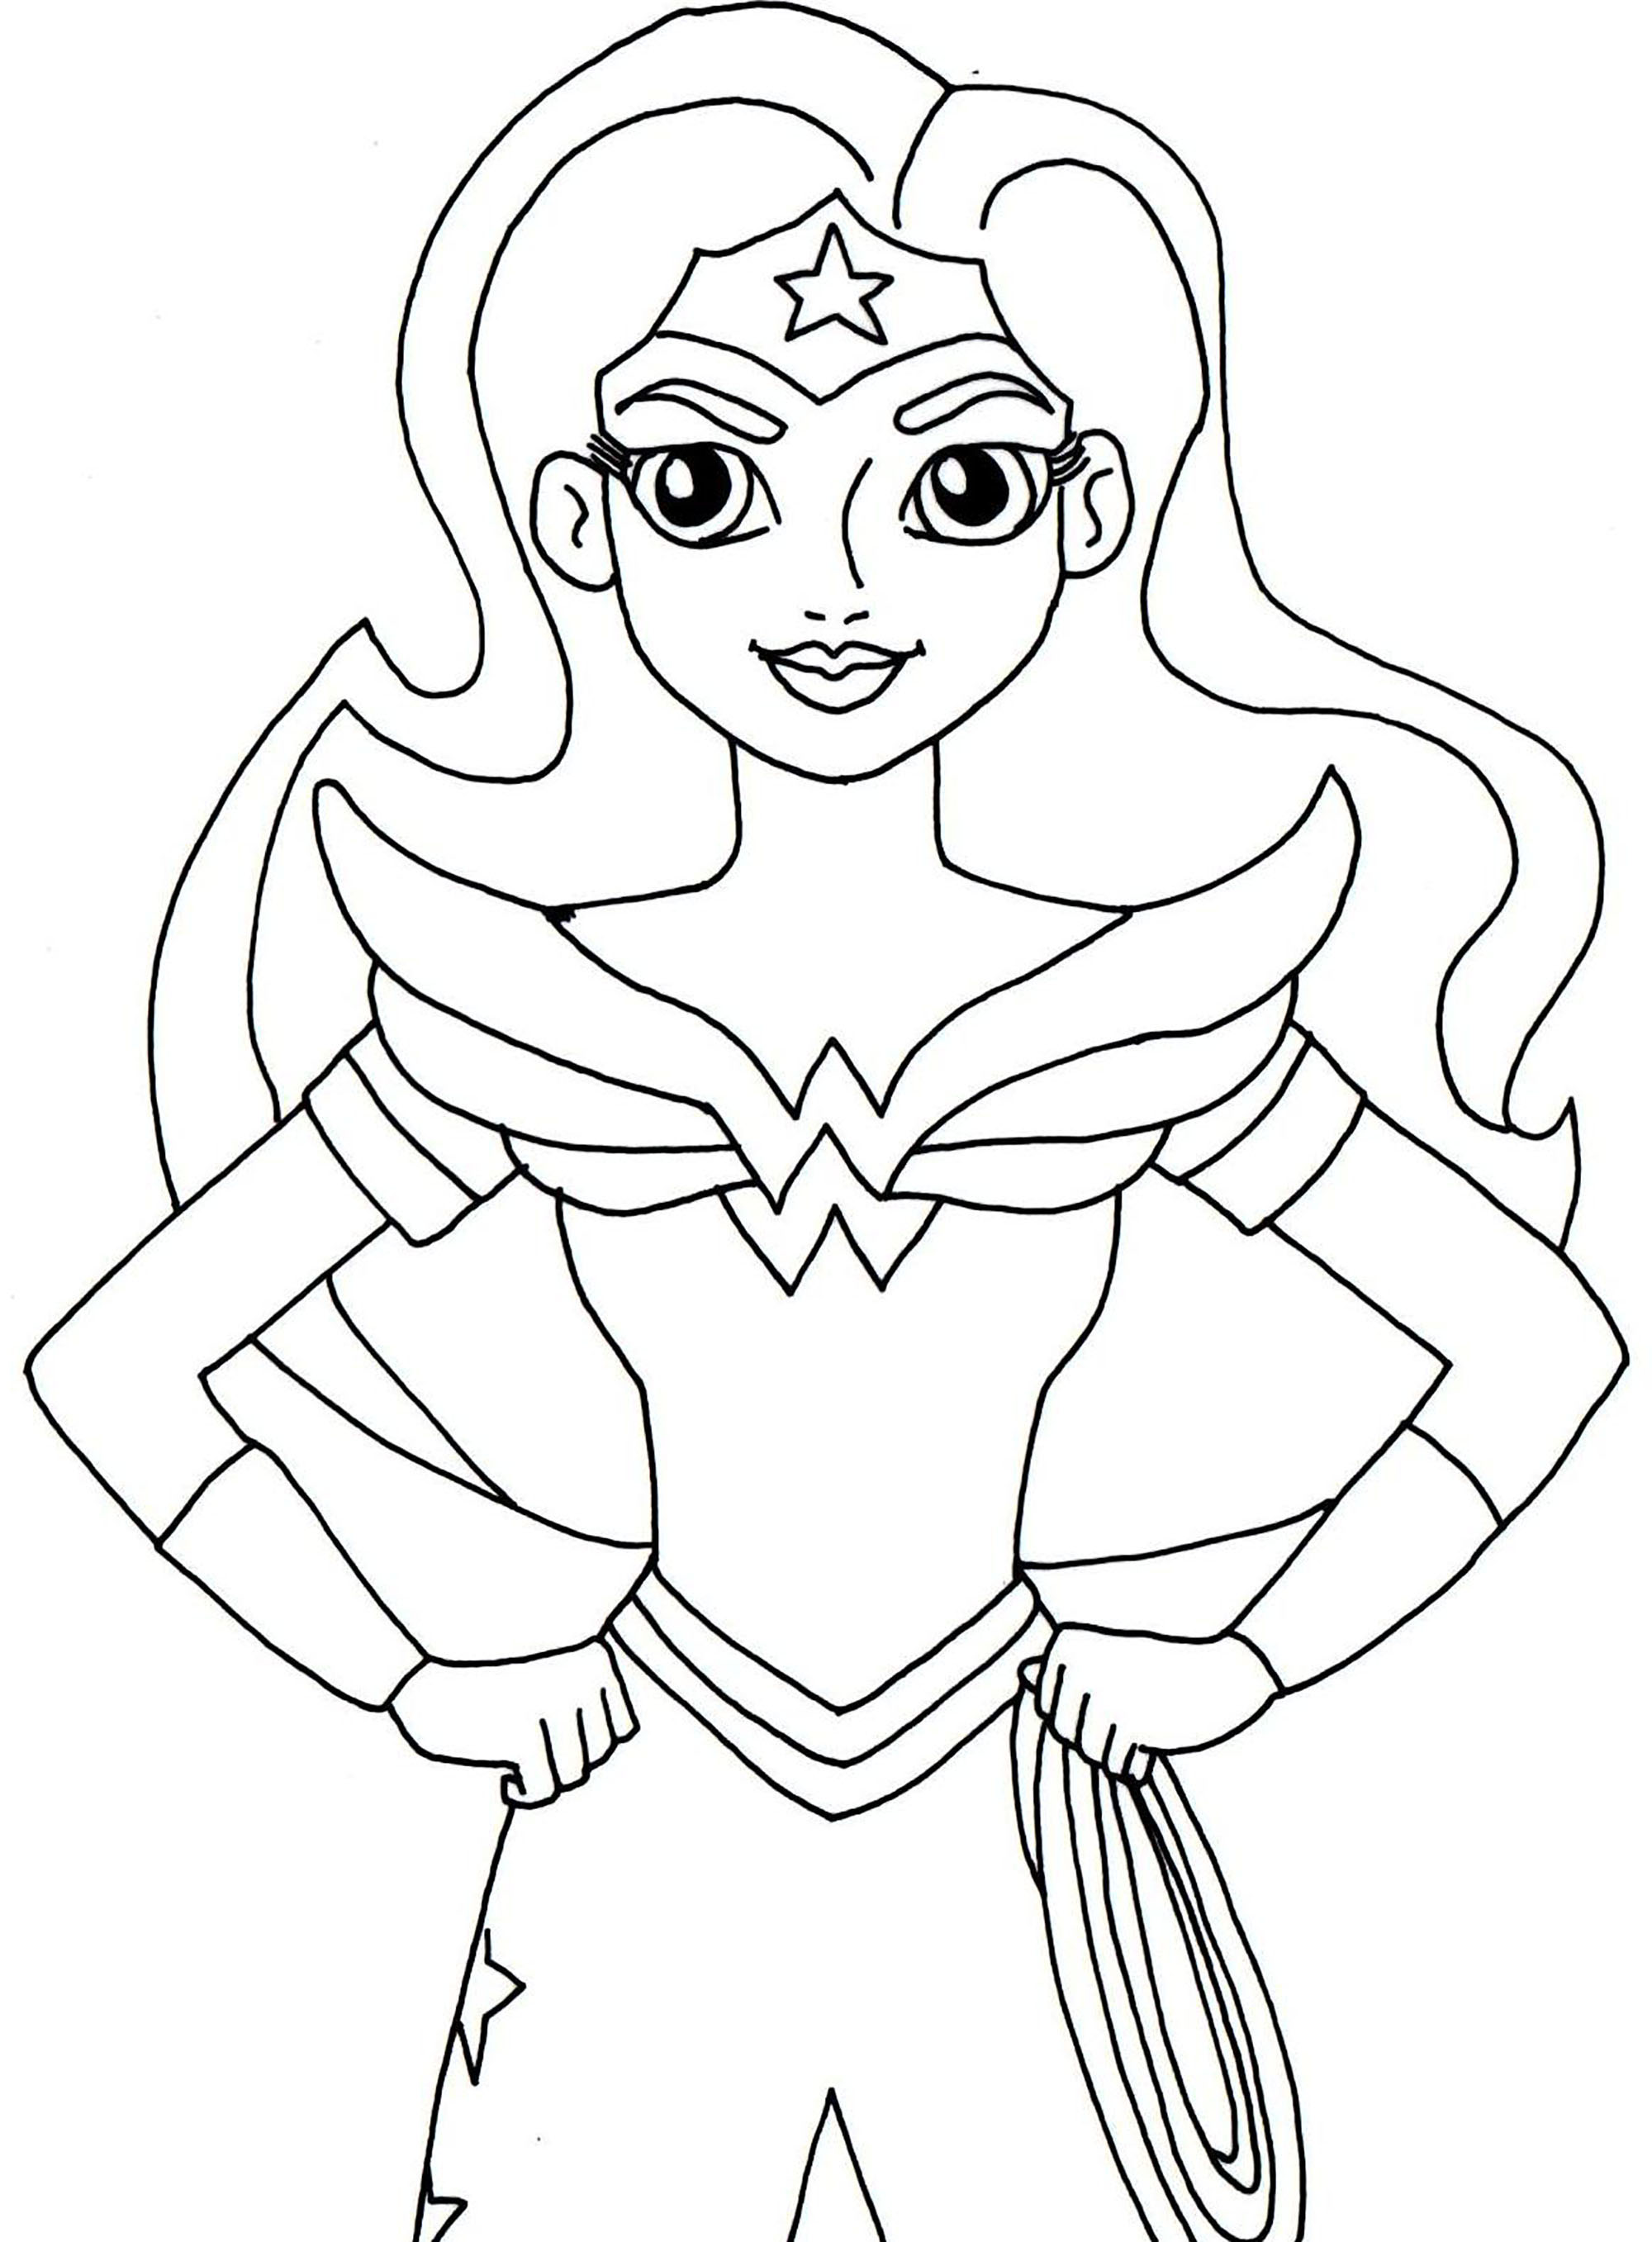 Funny Wonder Woman coloring page for children